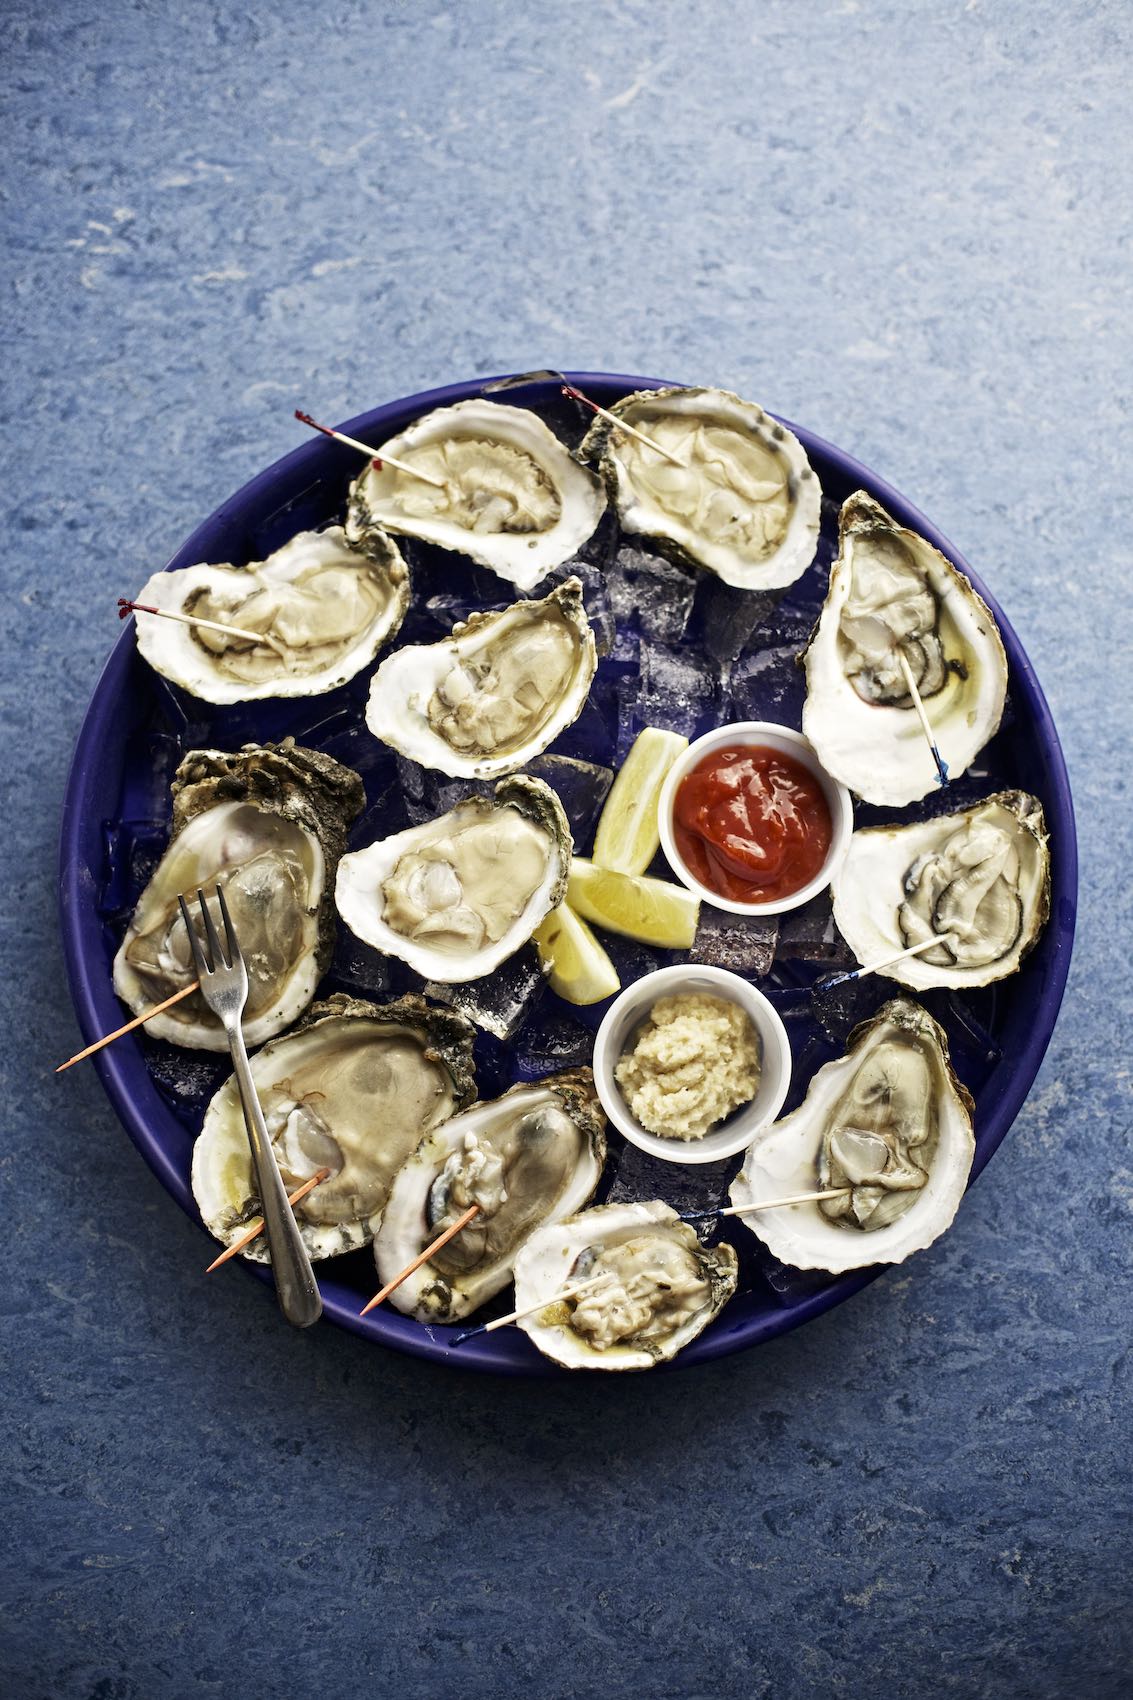 Jody Horton Photography - Dozen raw oysters on ice with dressings.